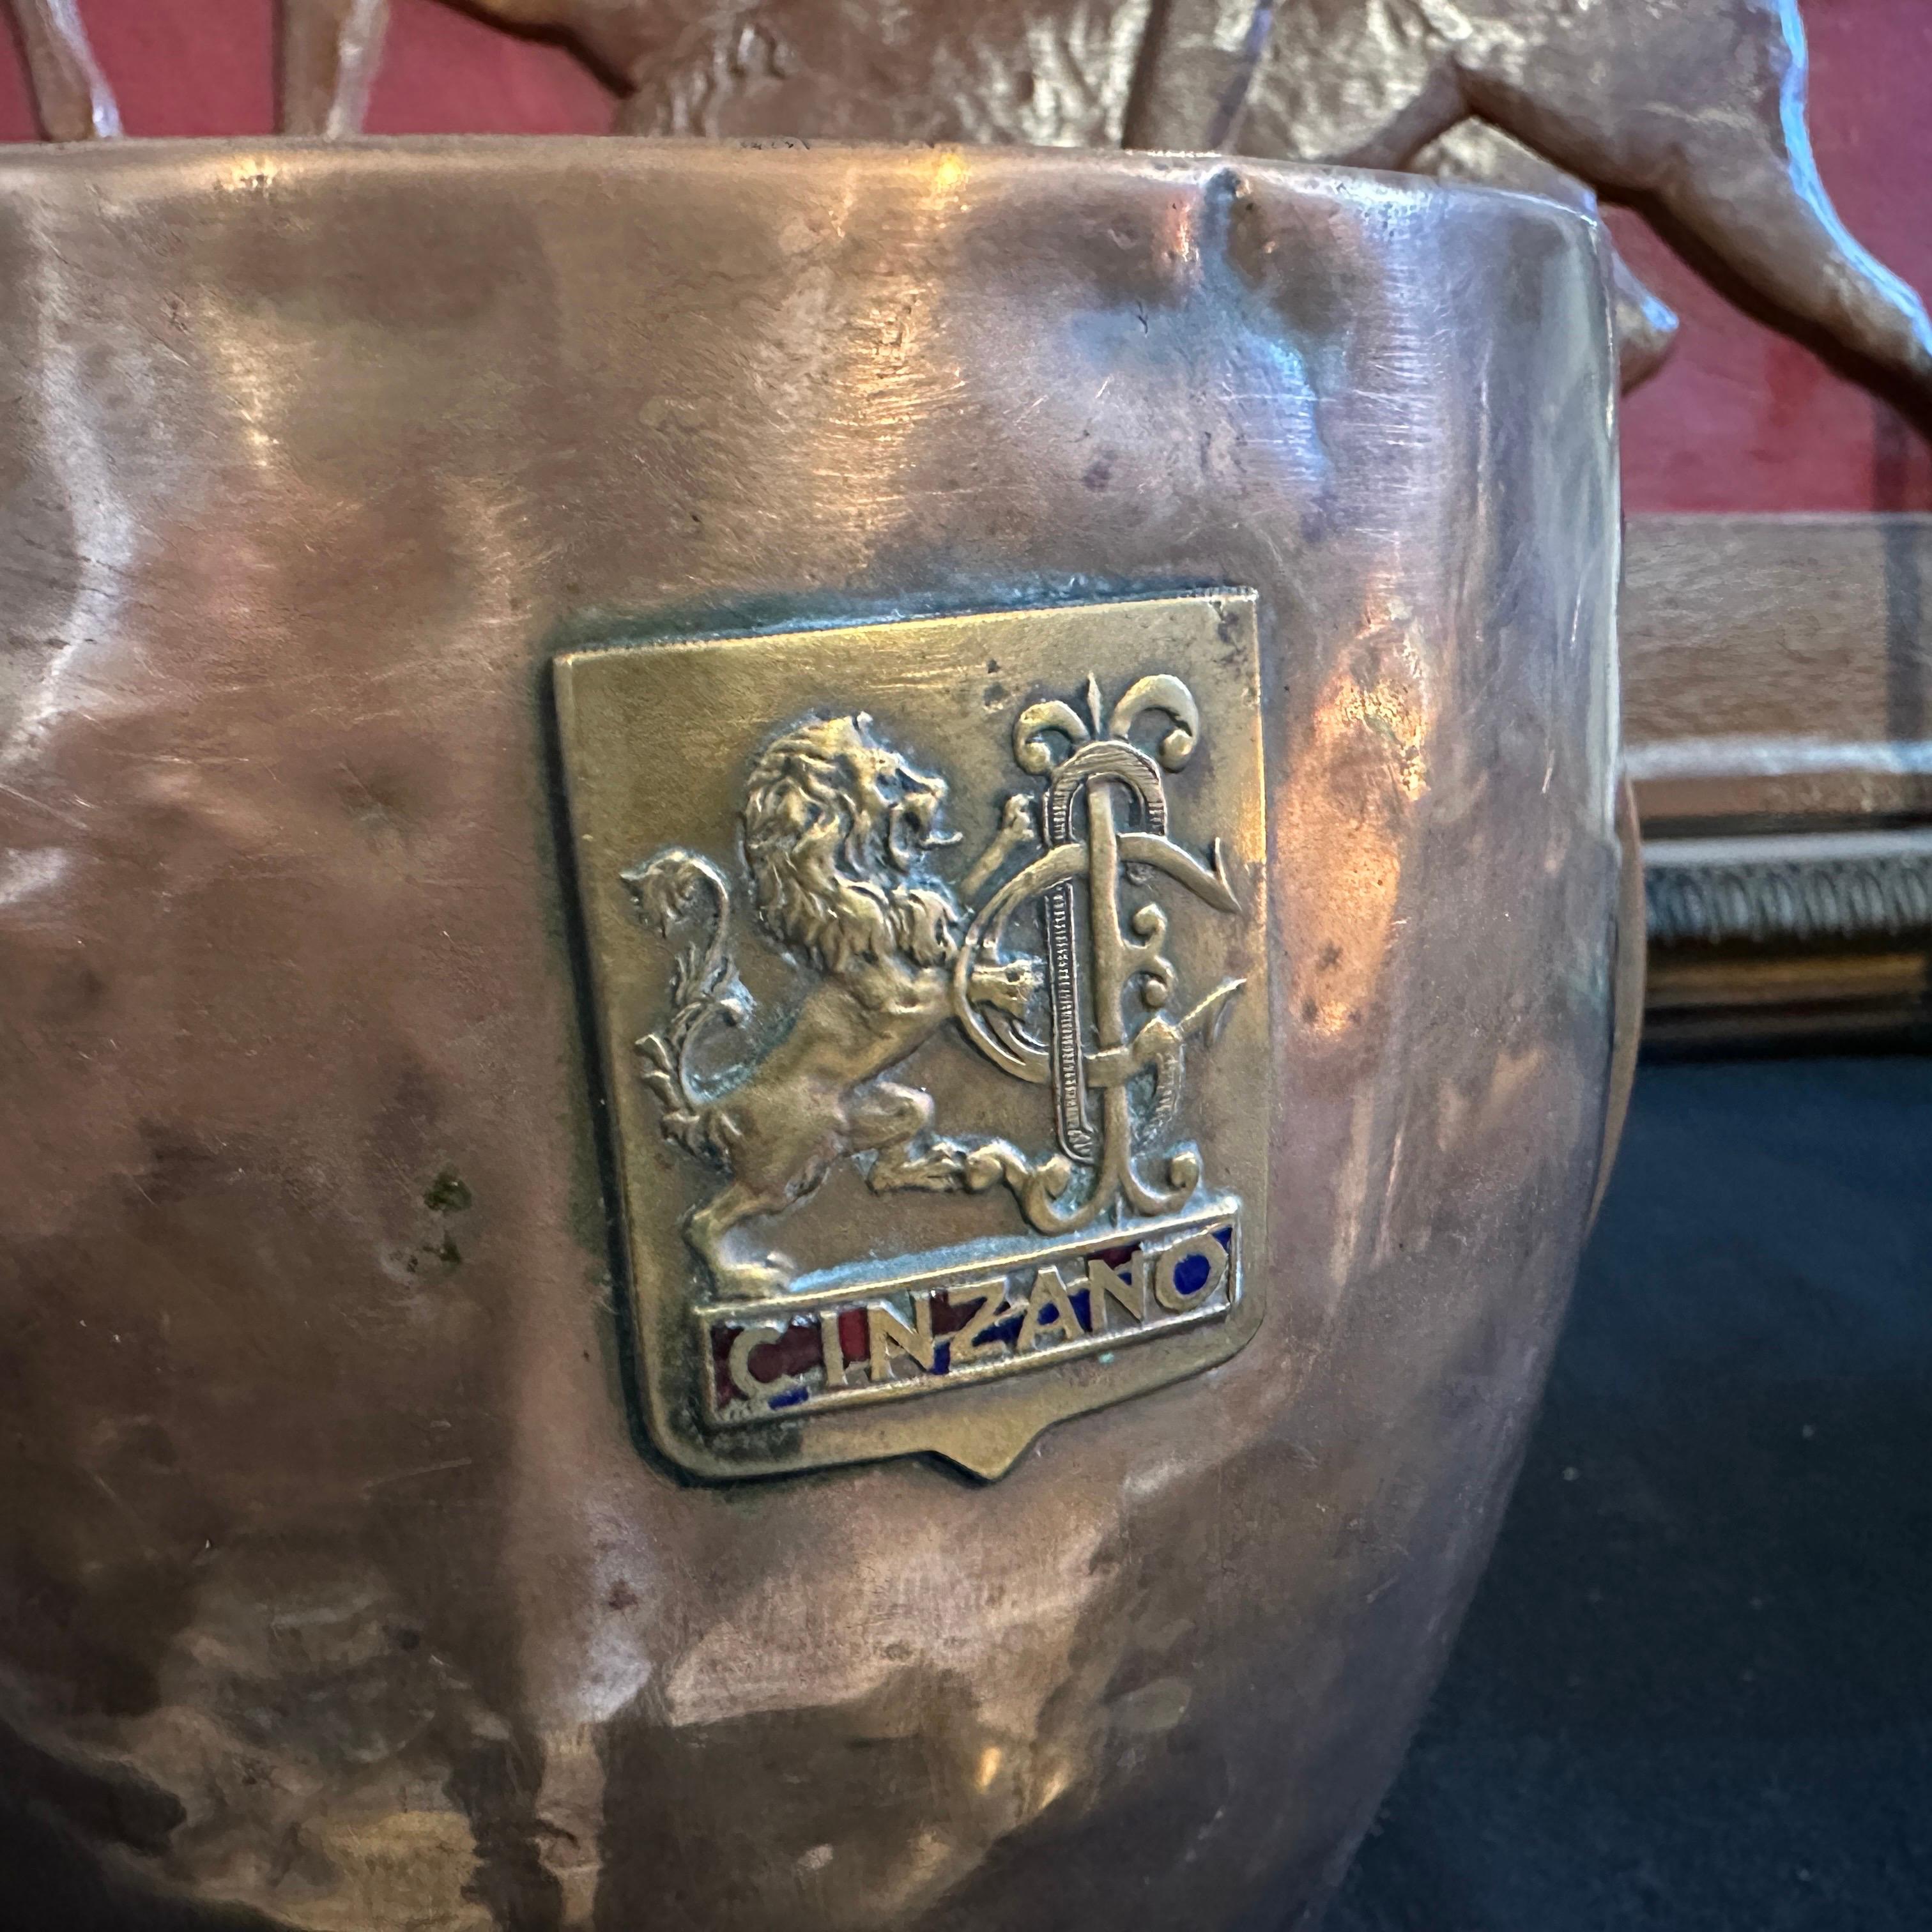 1940s Art Deco Hammered Copper and Brass Italian Cinzano Wine Cooler For Sale 3